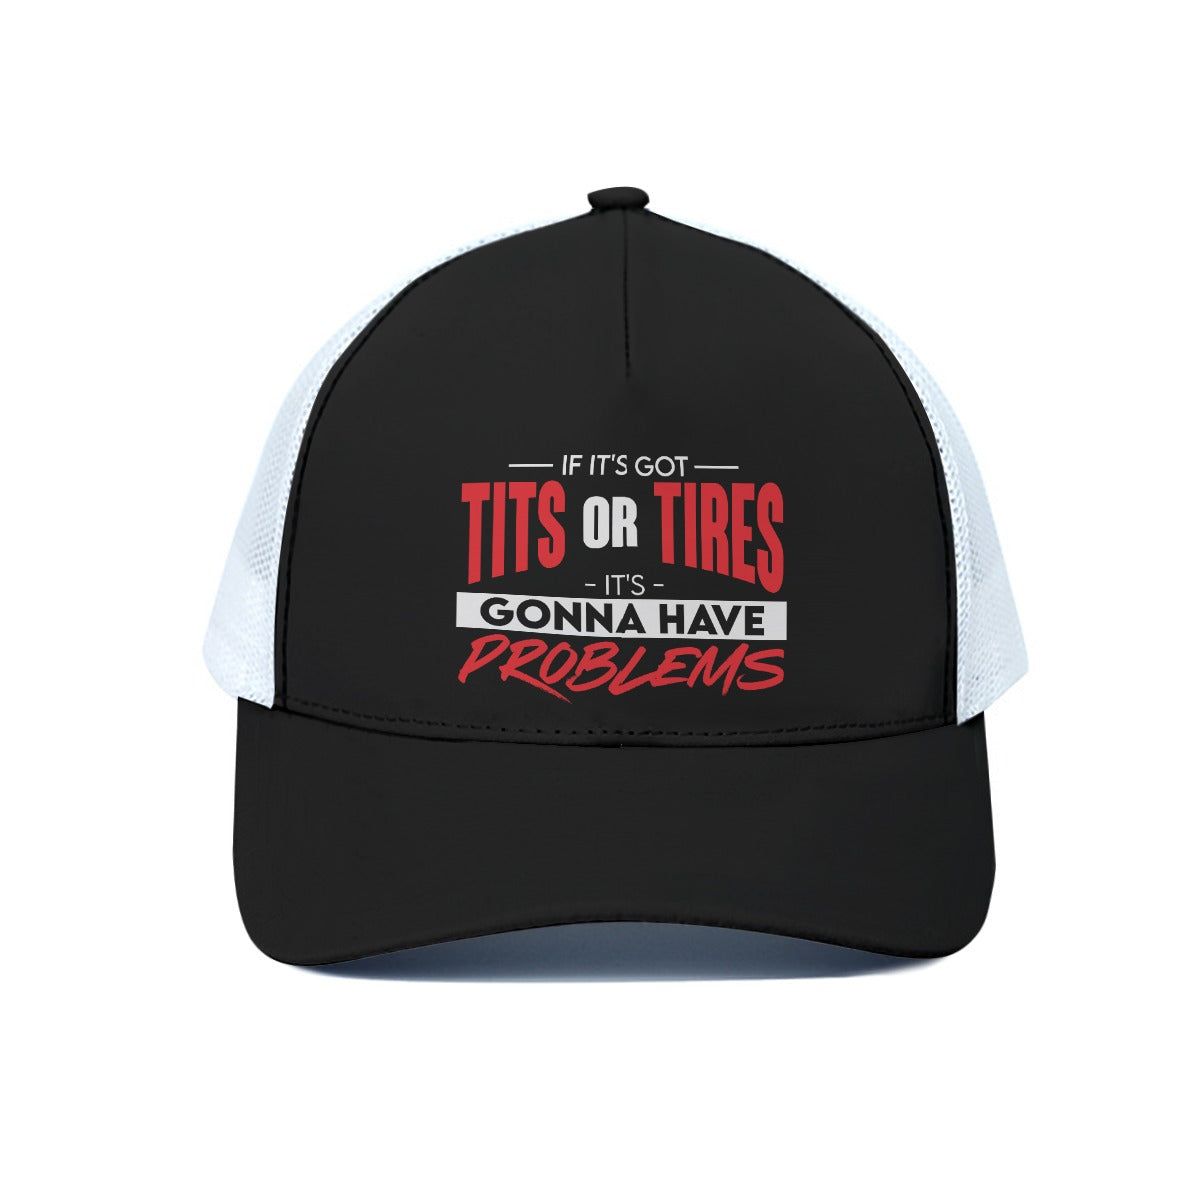 TRUCKER HAT - If it's got tits or tires it's gonna have problems